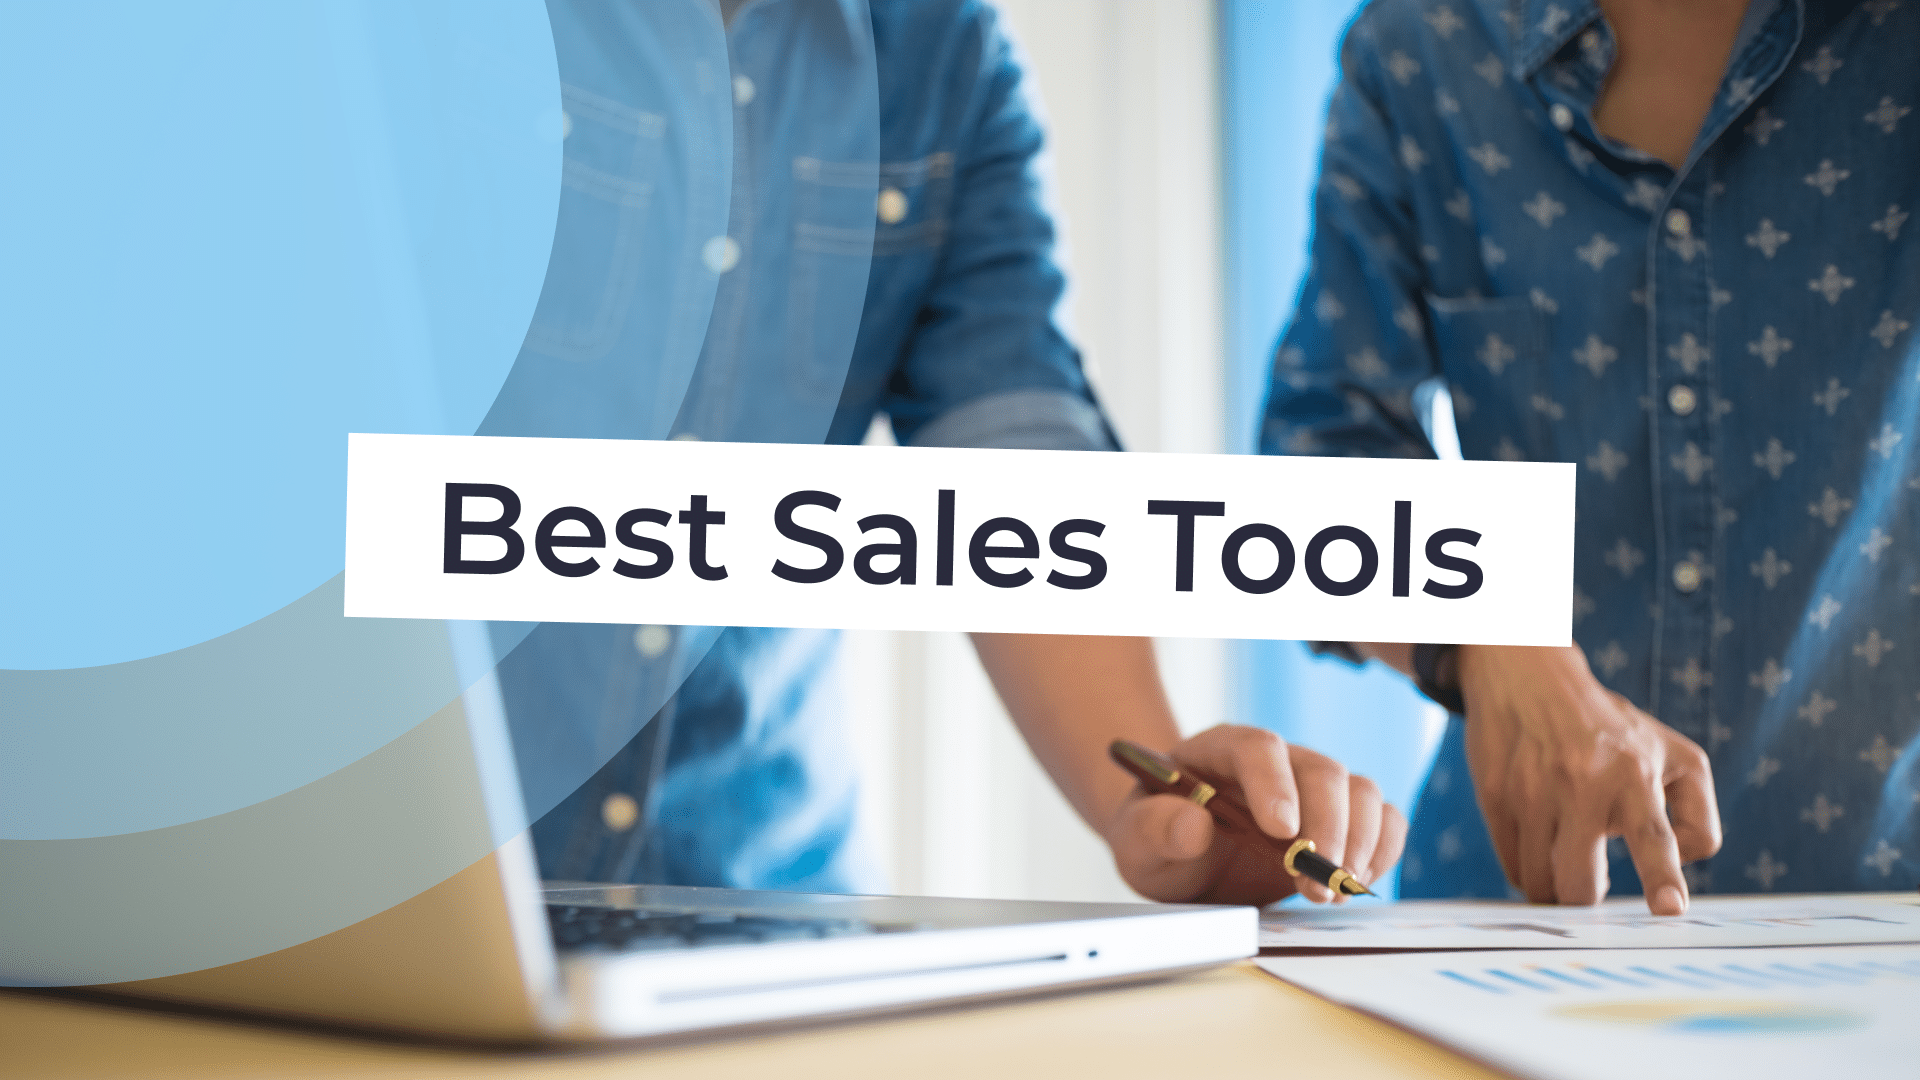 The 21 Best Sales Tools to Fast-track Leads | 2022 List